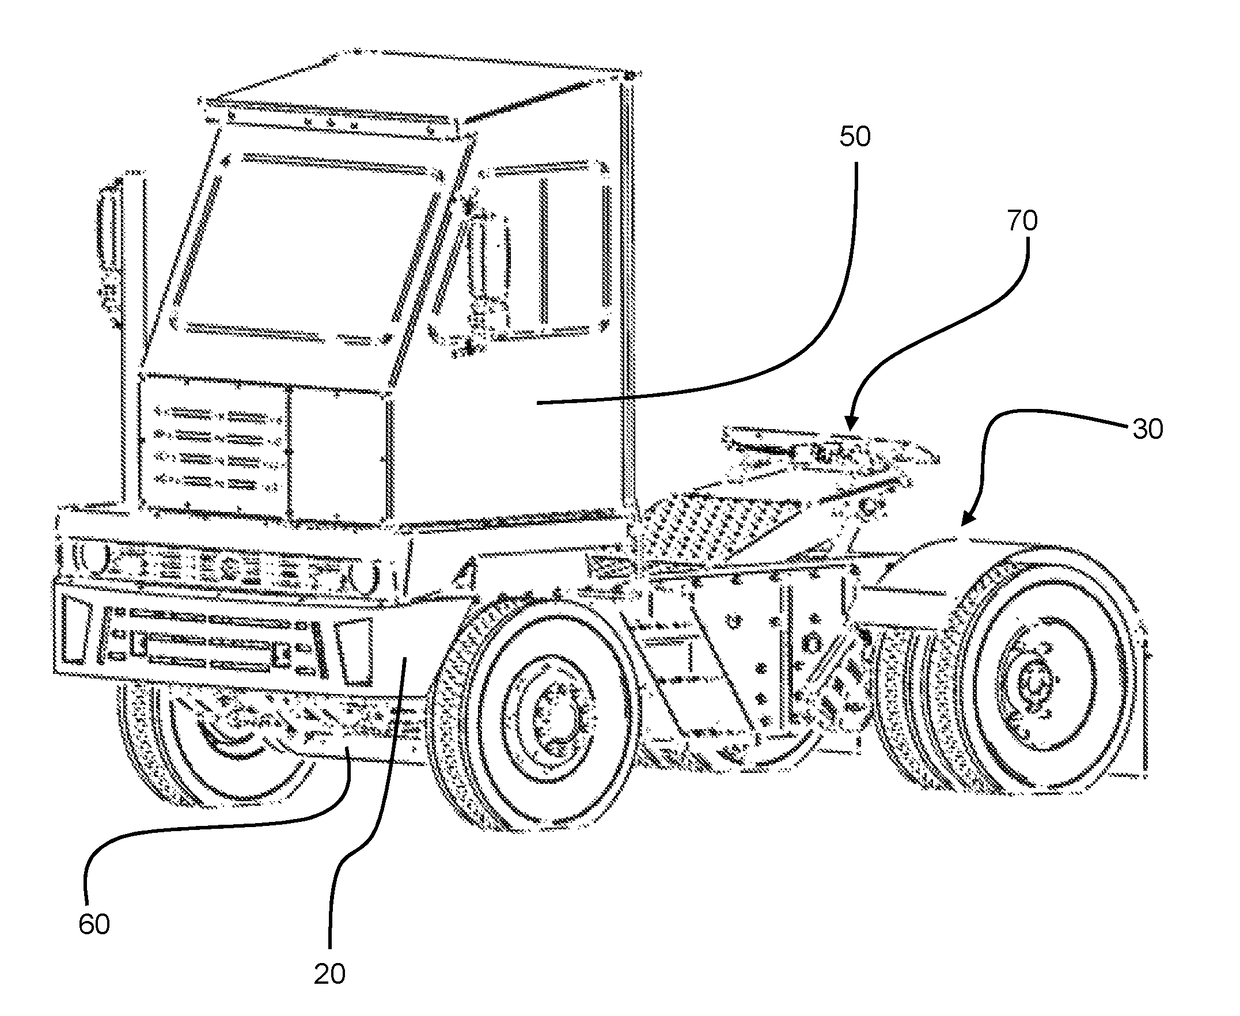 Vehicles configured for removable attachment of implements